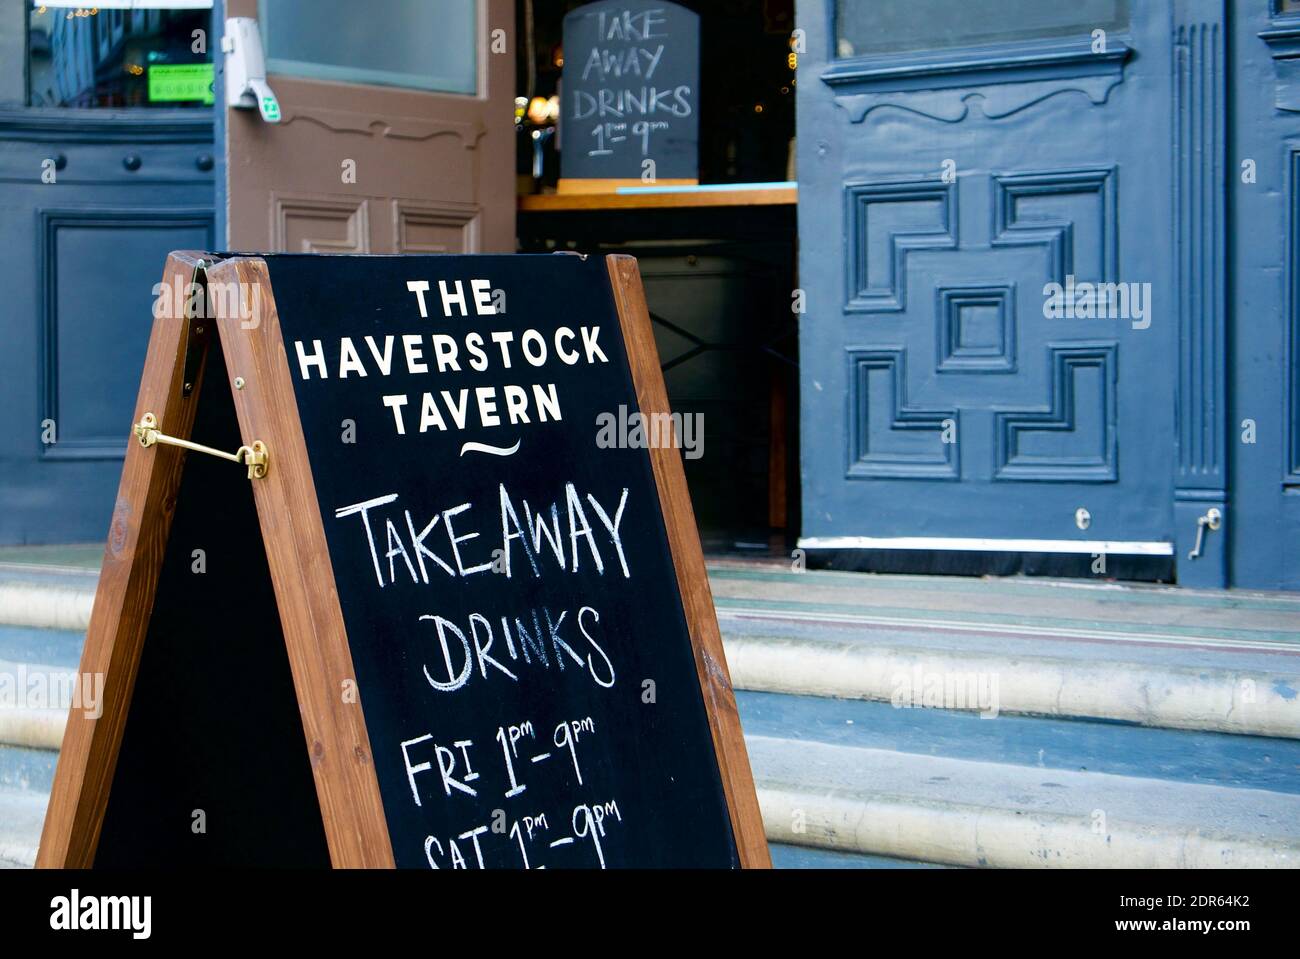 Sign advertising take away alcoholic drinks at The Haverstock Tavern a pub closed to customers due to tier 4 covid19 restrictions. Hampstead, London. Stock Photo